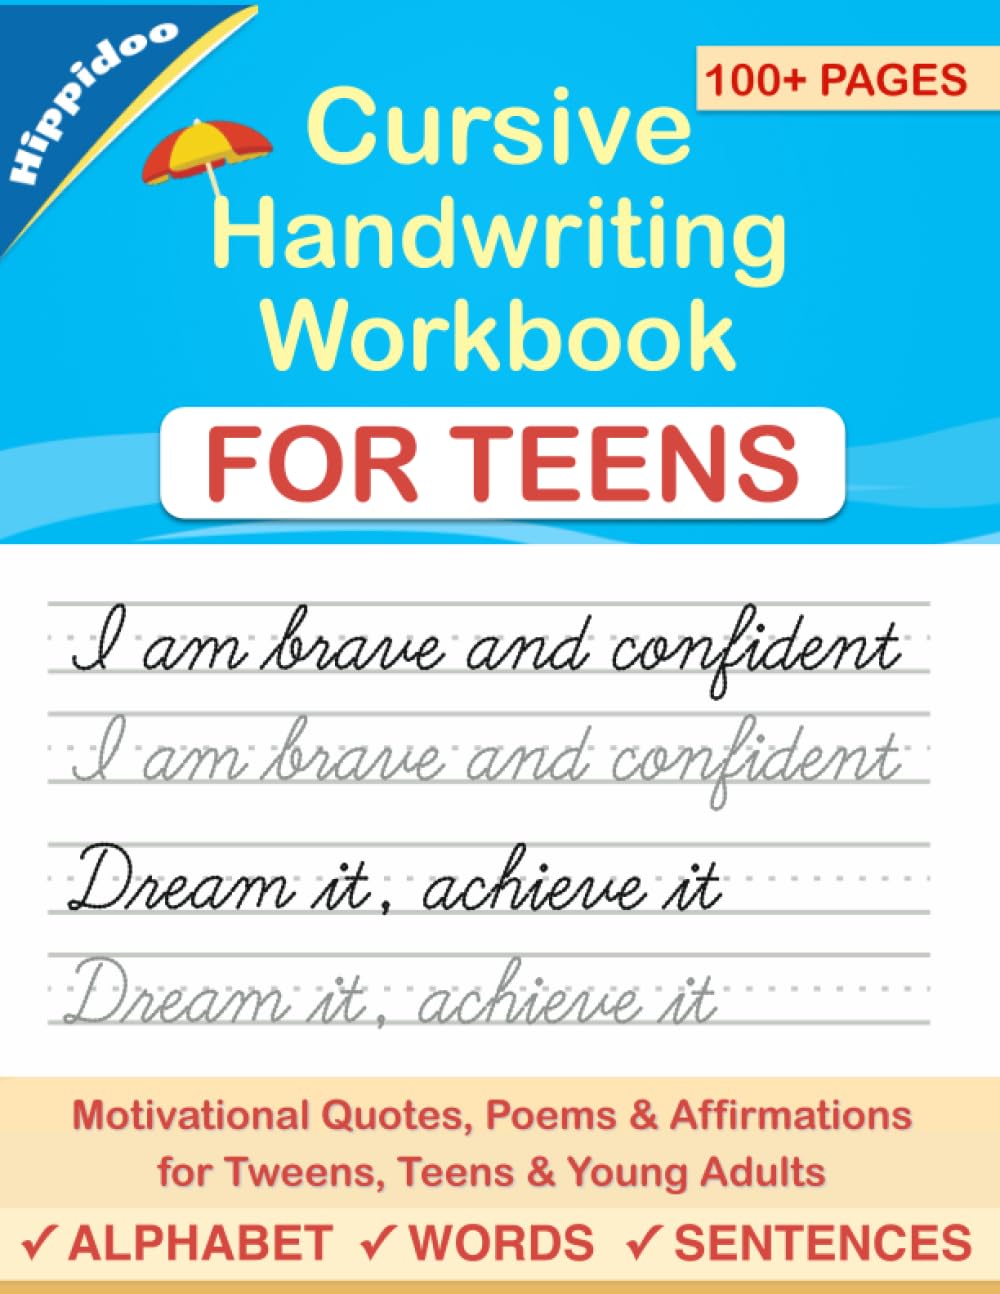 Cursive Handwriting Workbook for Teens: A cursive writing practice workbook for young adults and teens (Master Print and Cursive Writing Penmanship for Teens)